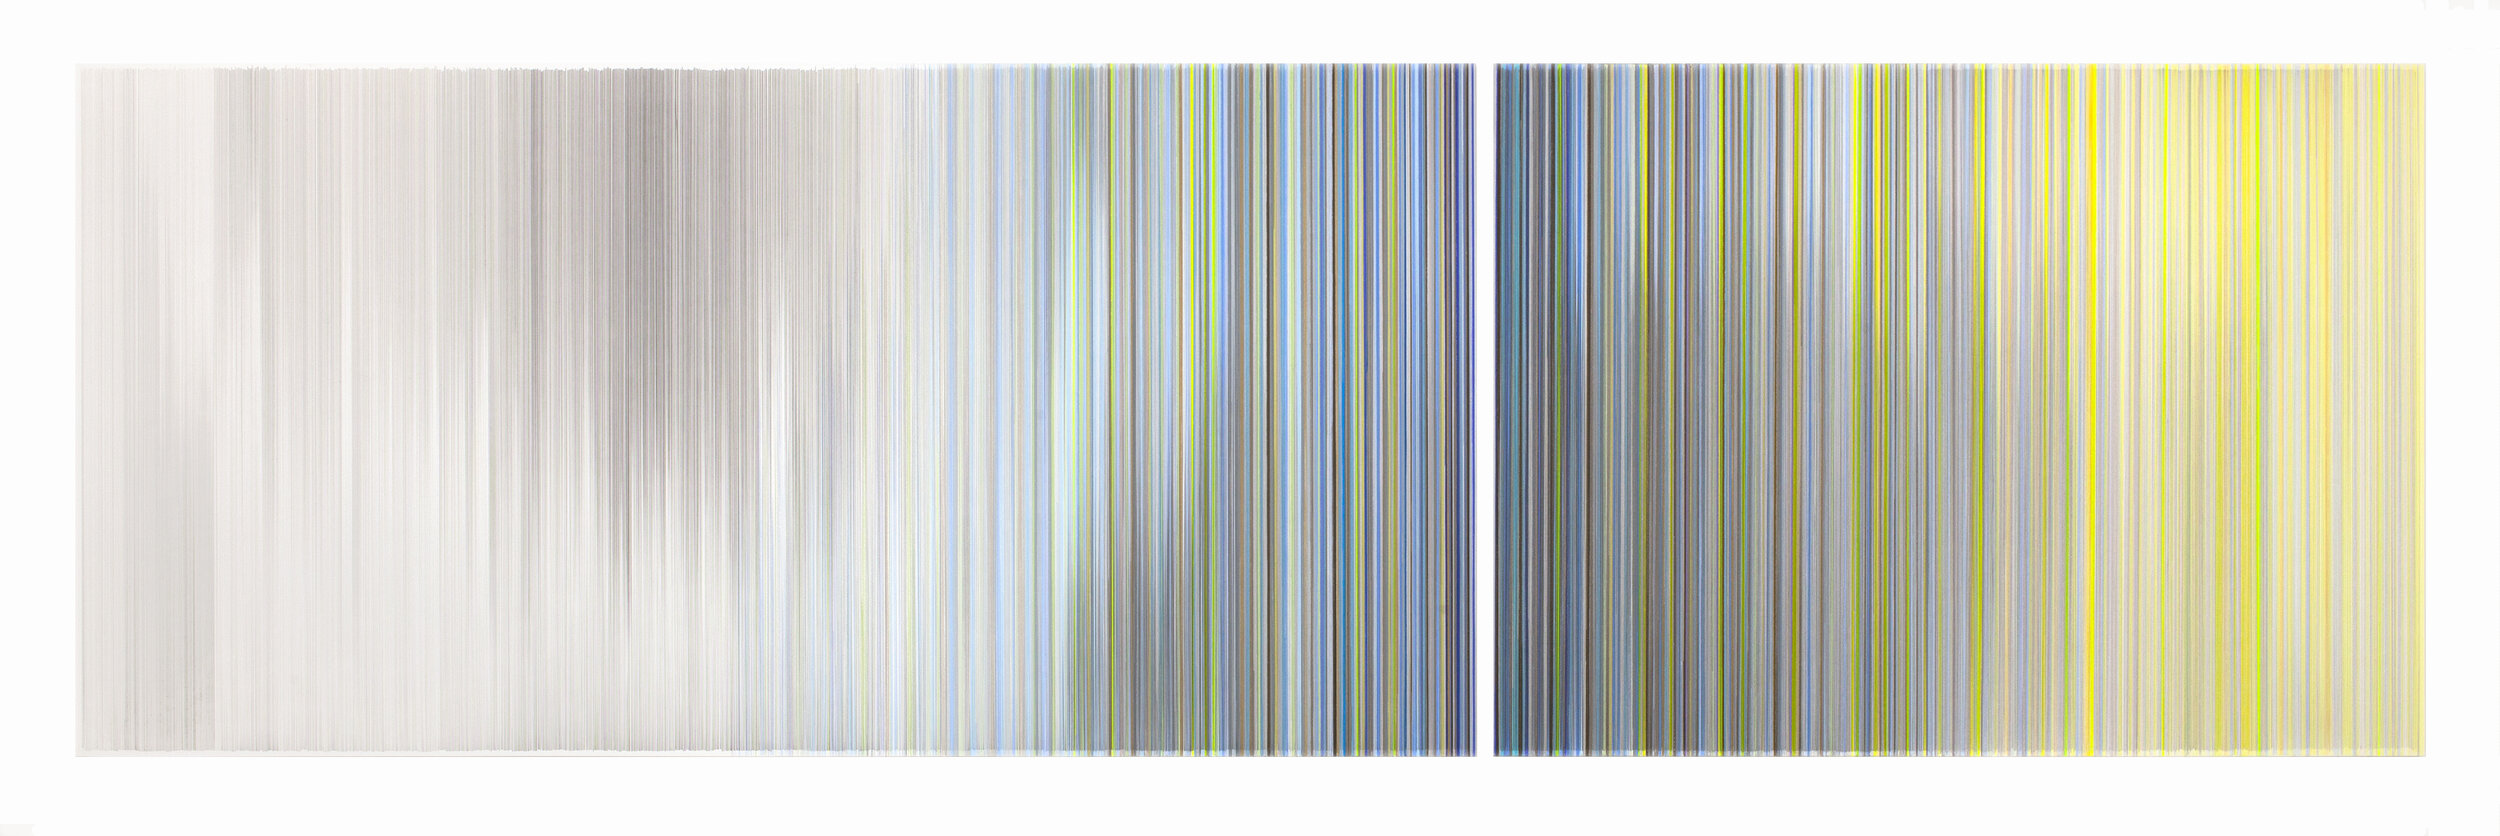    cycles of seeing 01   2020 graphite and colored pencil on mat board 34 by 116 inches 